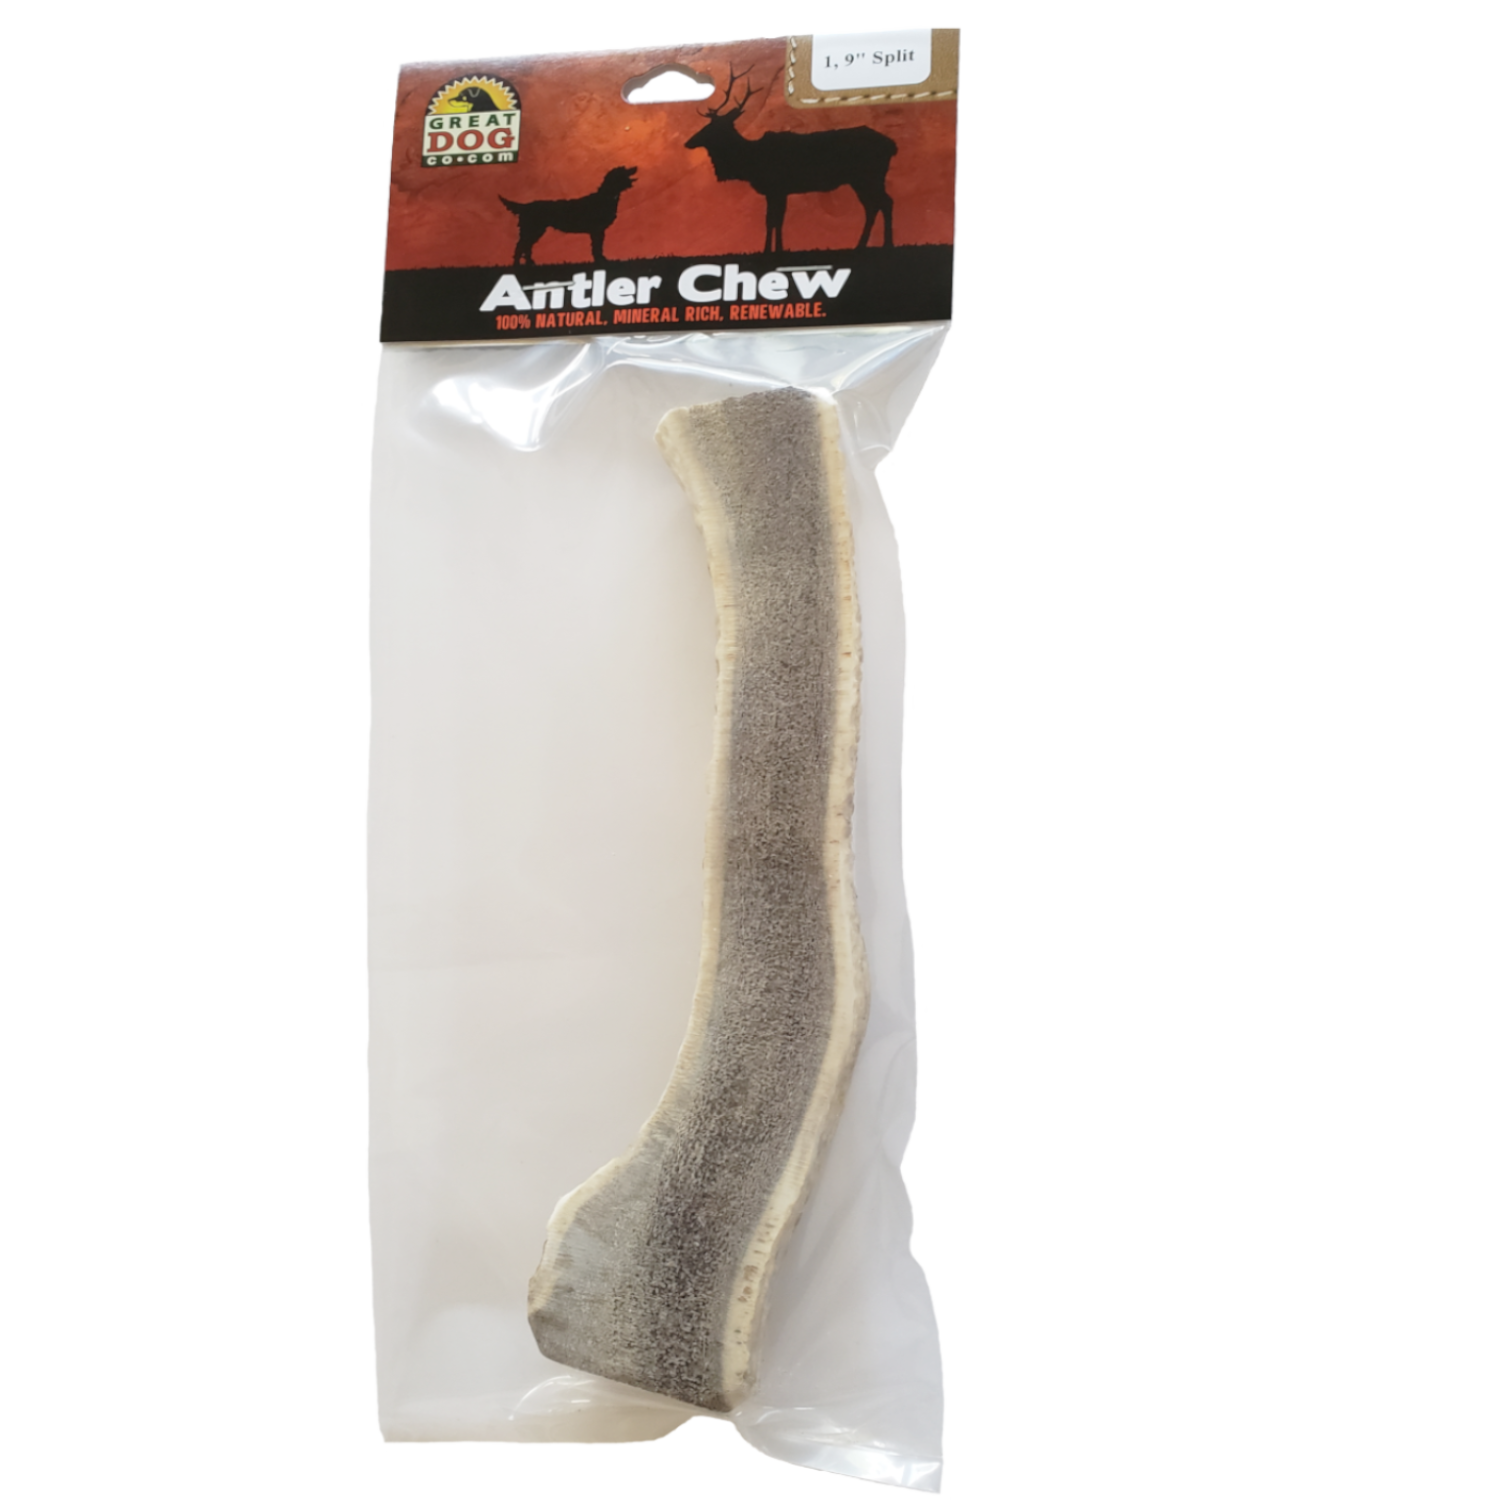 GREAT DOG 1, 9 Inch Split Red Deer Antler - Sourced and Made in USA